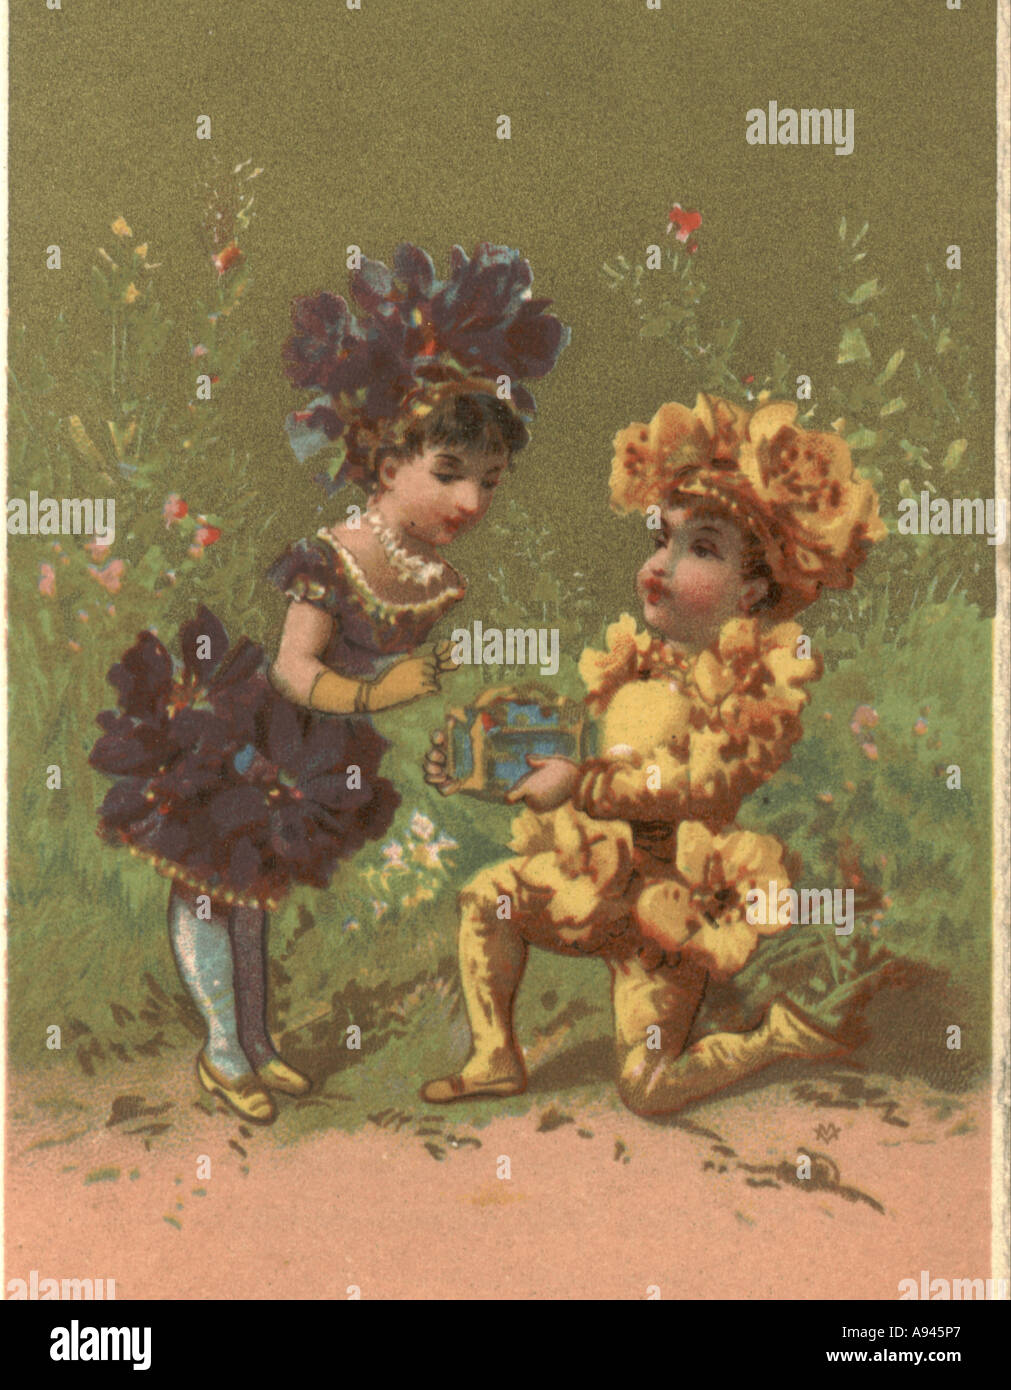 Flower children, Violet and Buttercup circa 1880 Stock Photo